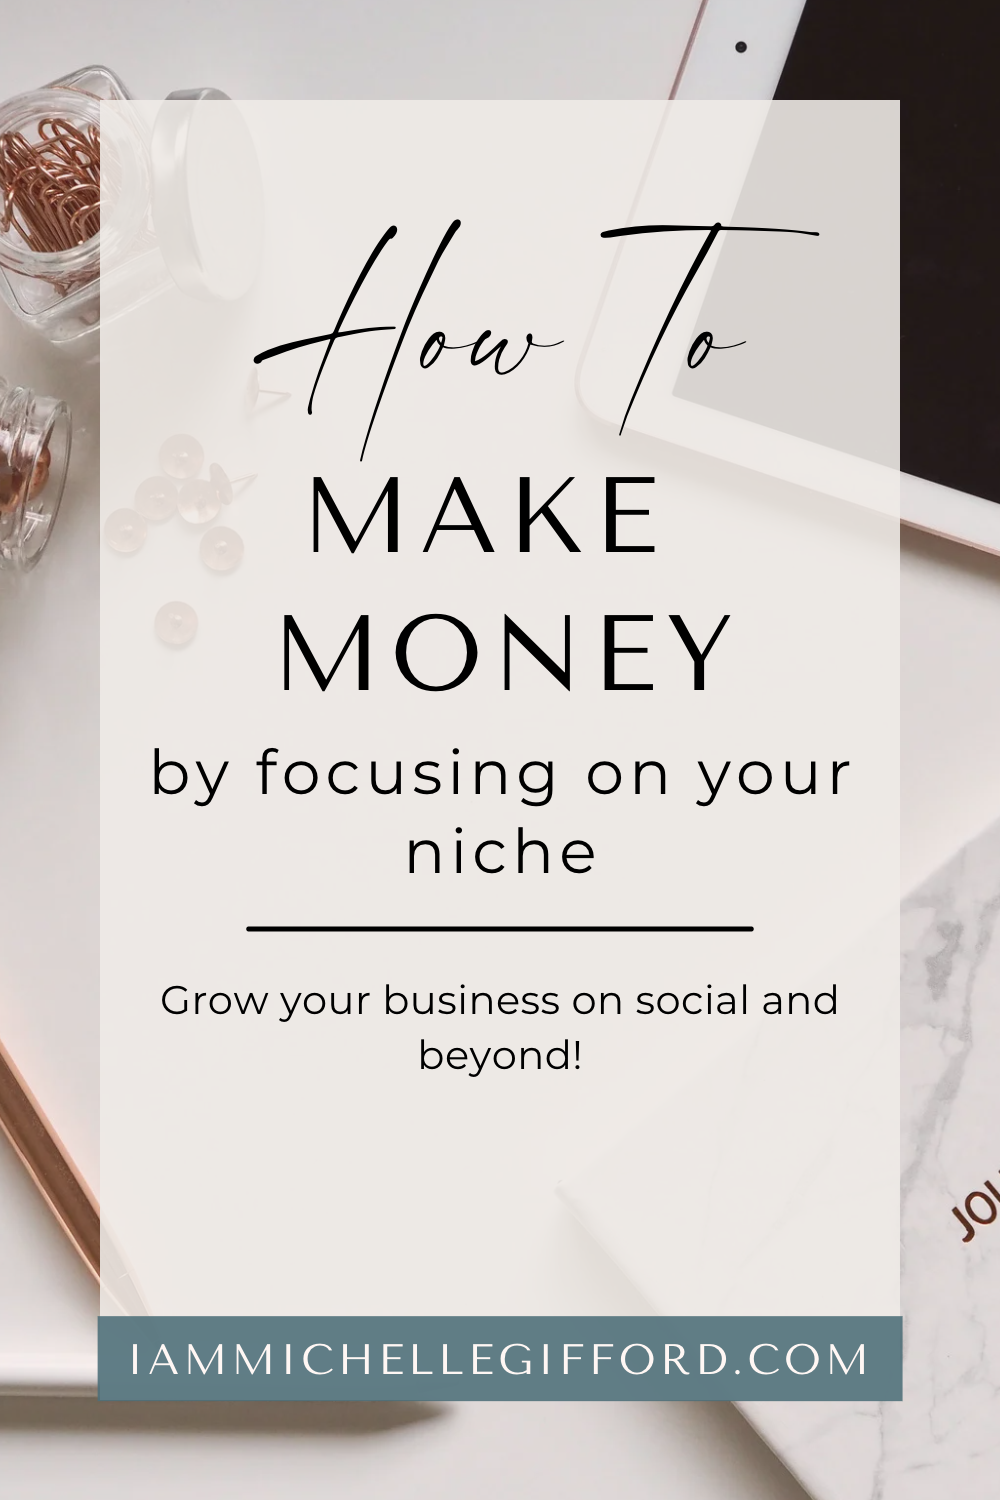 Niching down for small business owners - IAmMichelleGifford.com